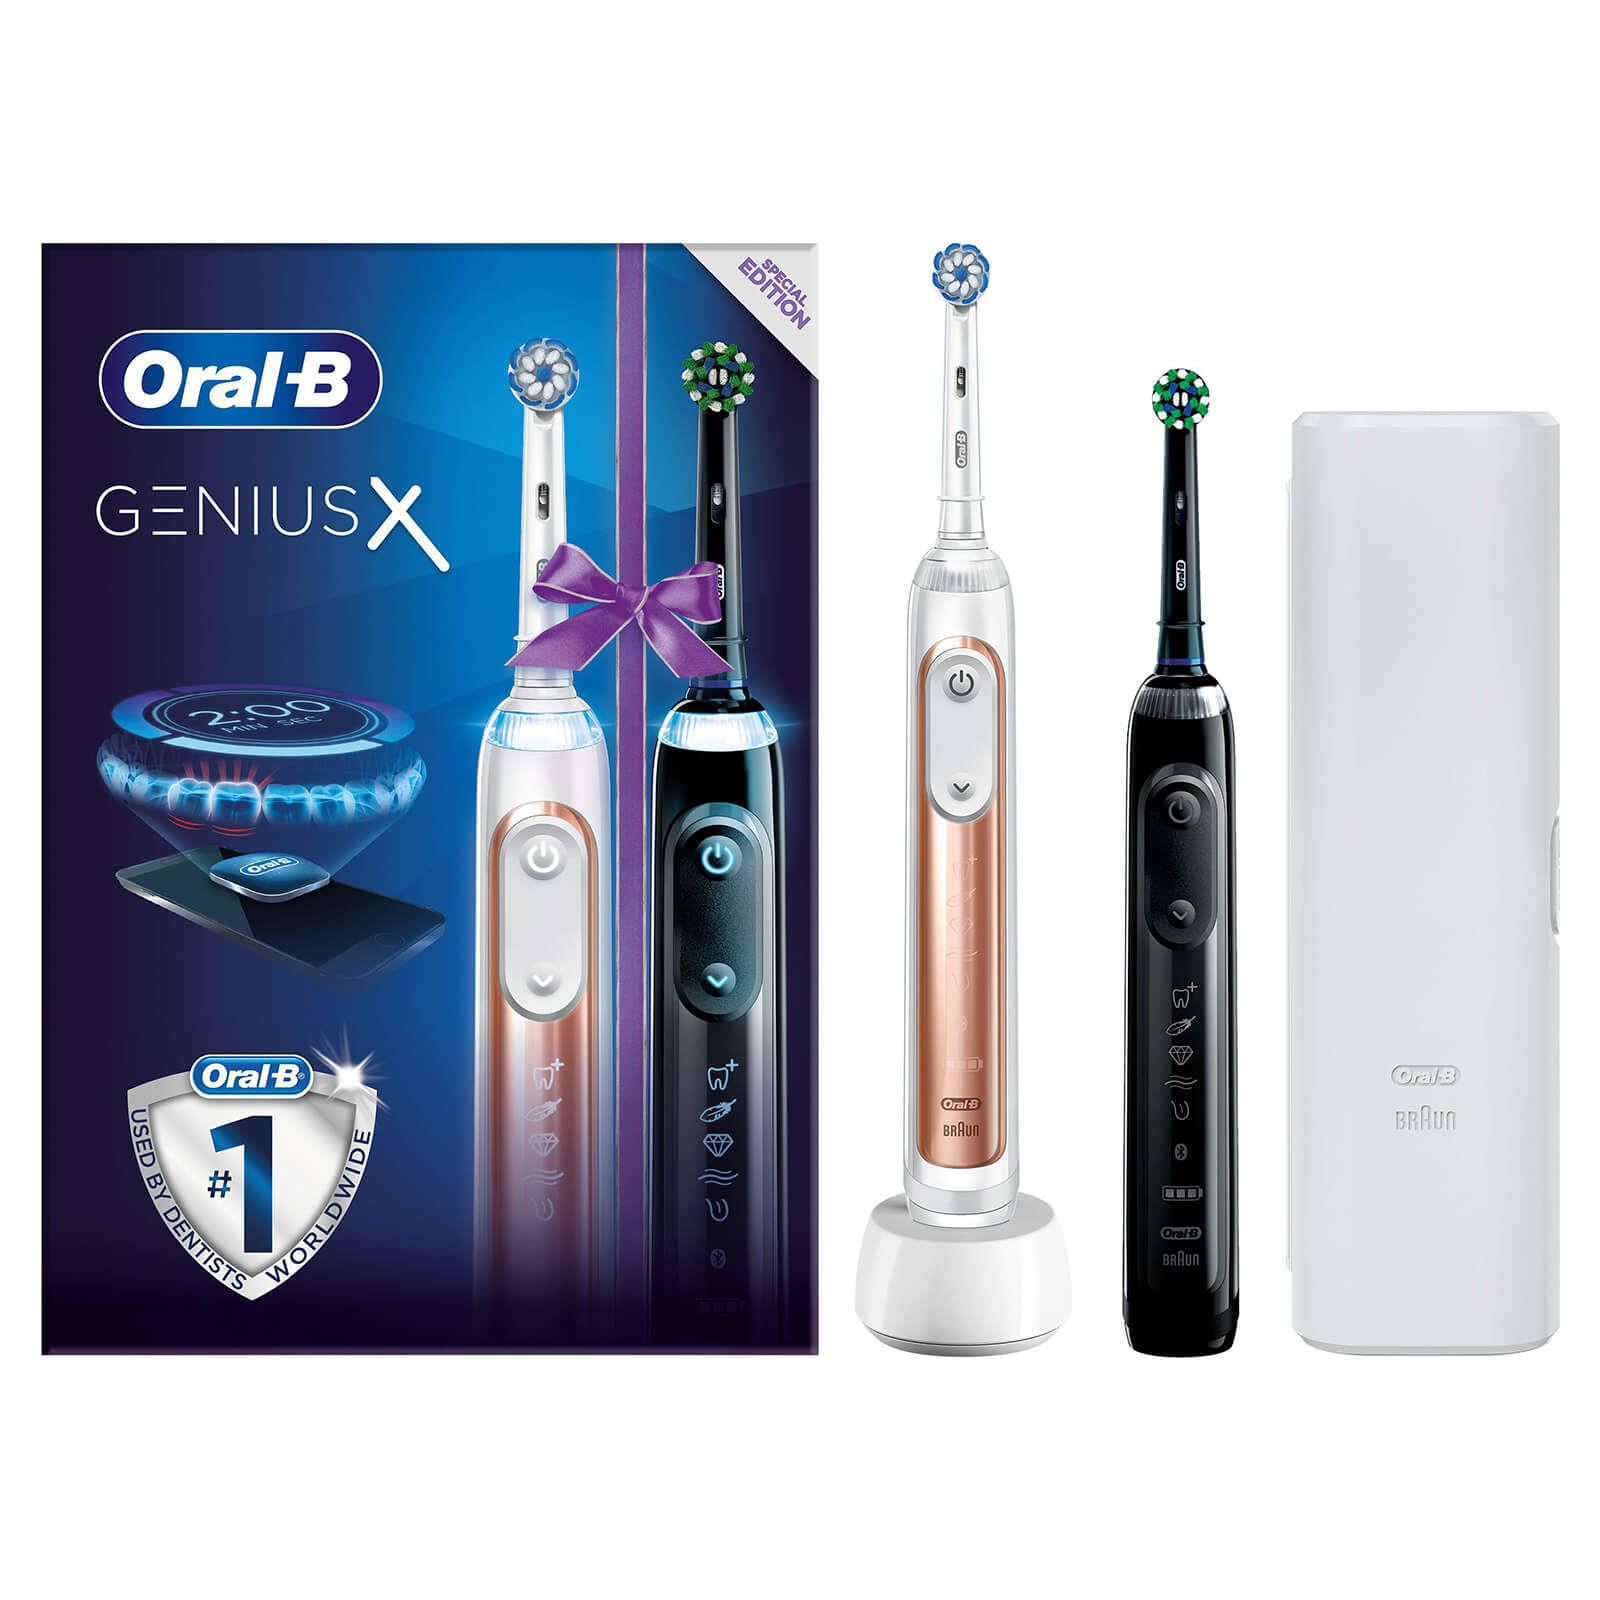 Oral B Genius X Duo Pack of Two Electric Toothbrushes Rose Gold & Black - Toothbrush